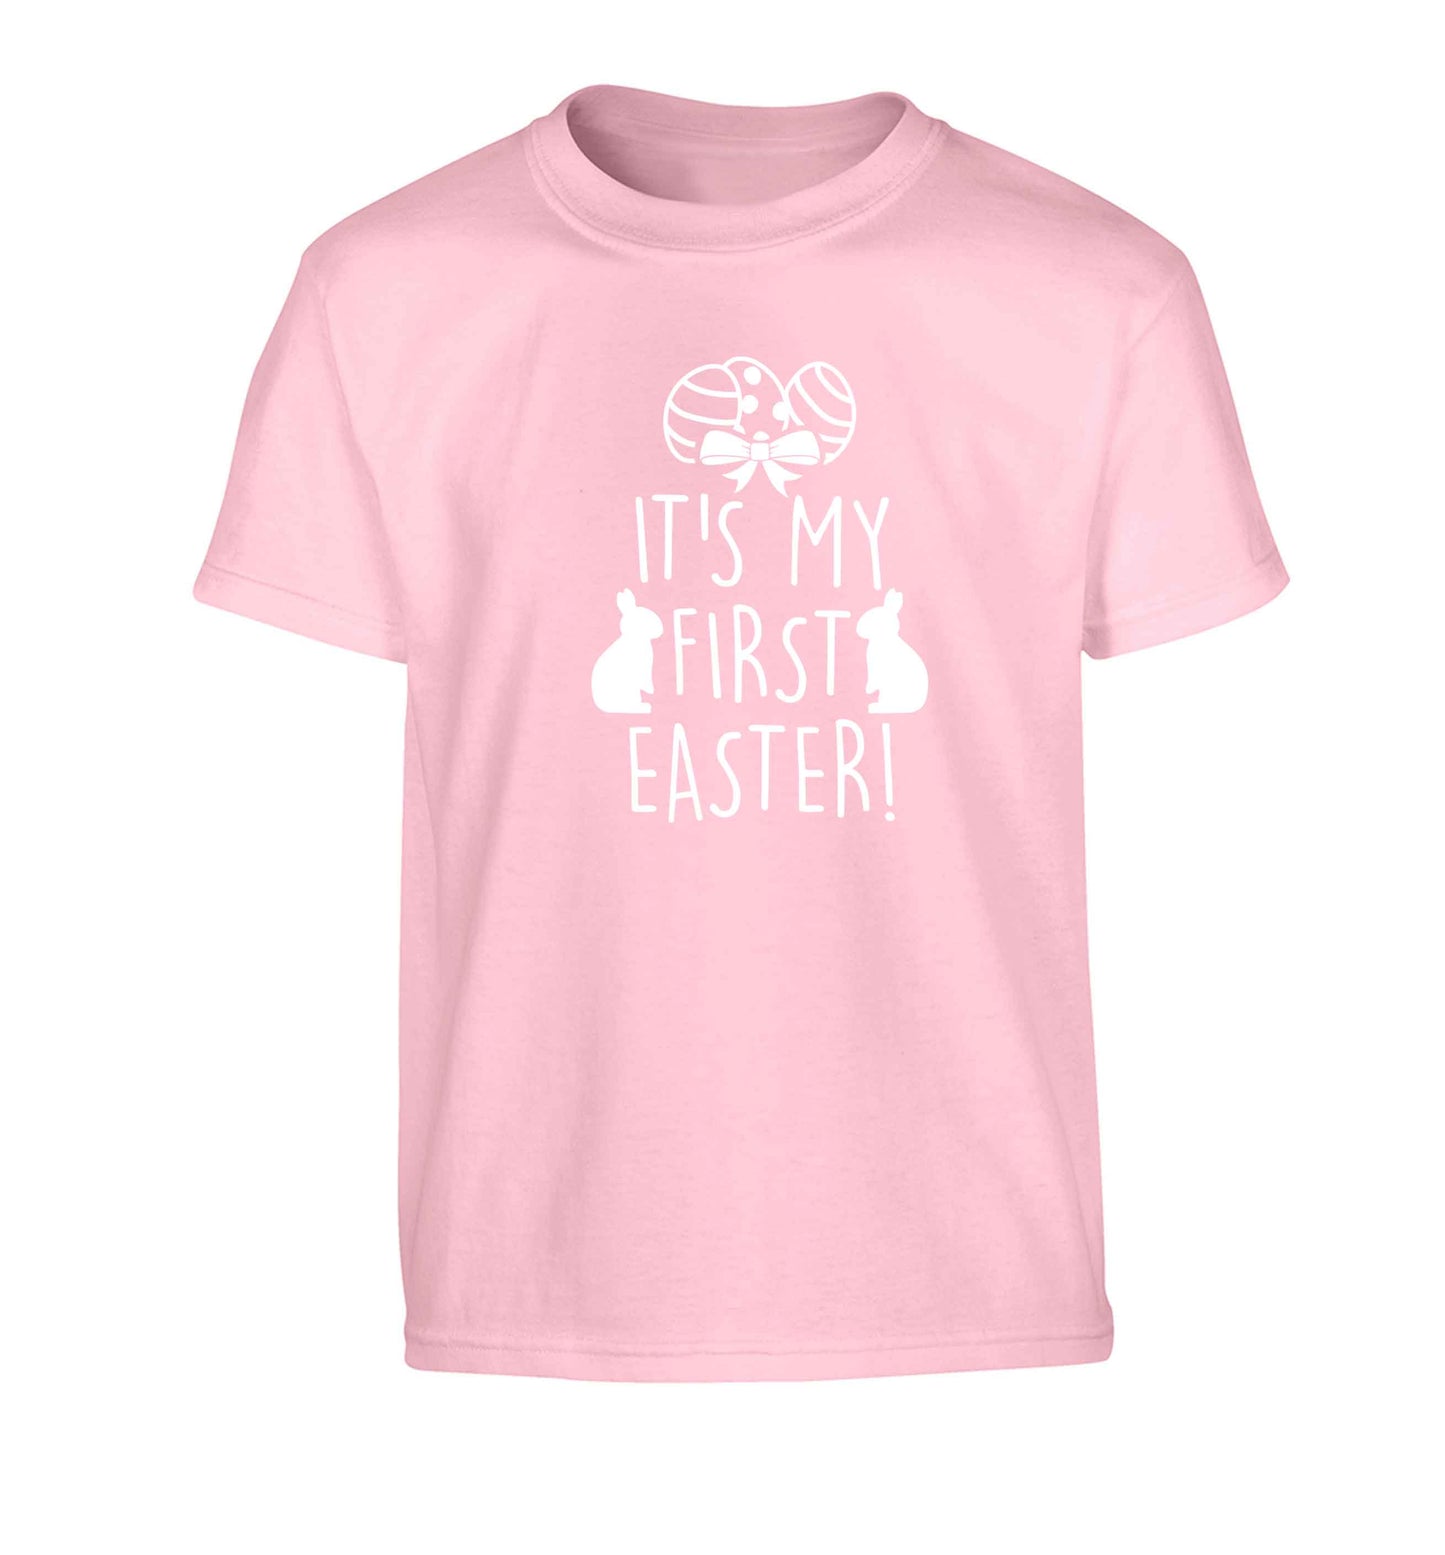 It's my first Easter Children's light pink Tshirt 12-13 Years